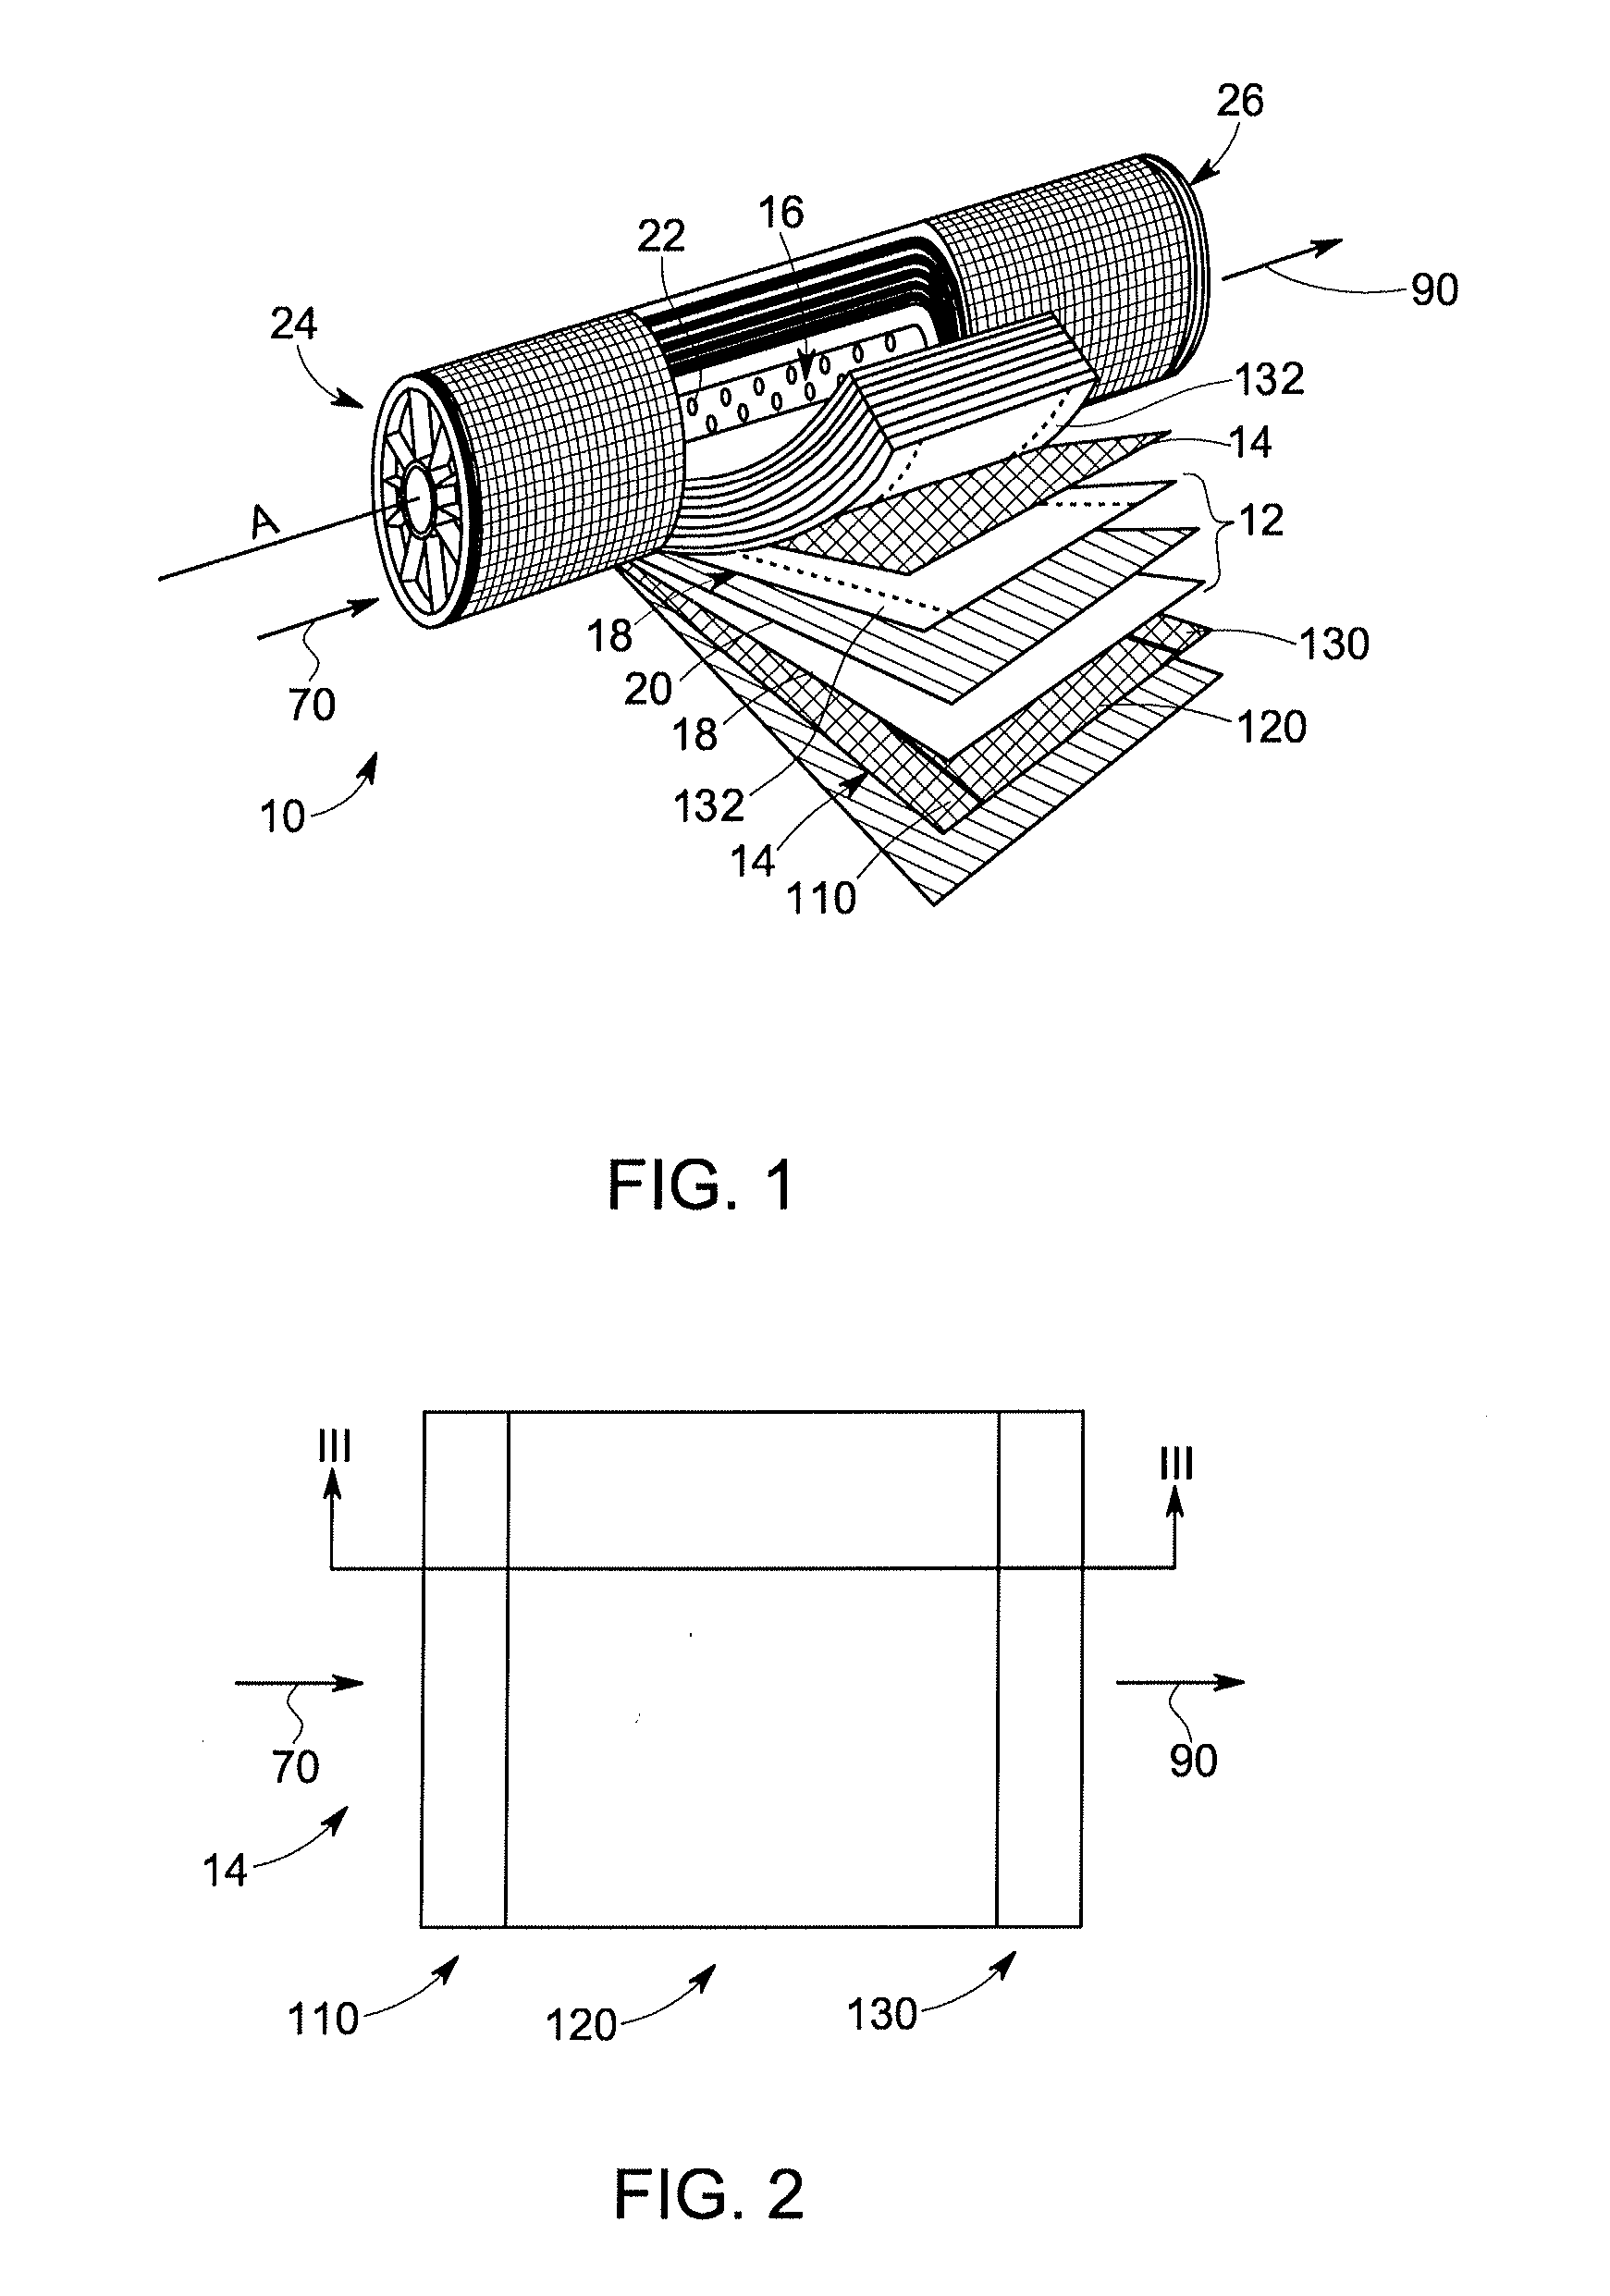 Feed spacers for spiral wound membrane element